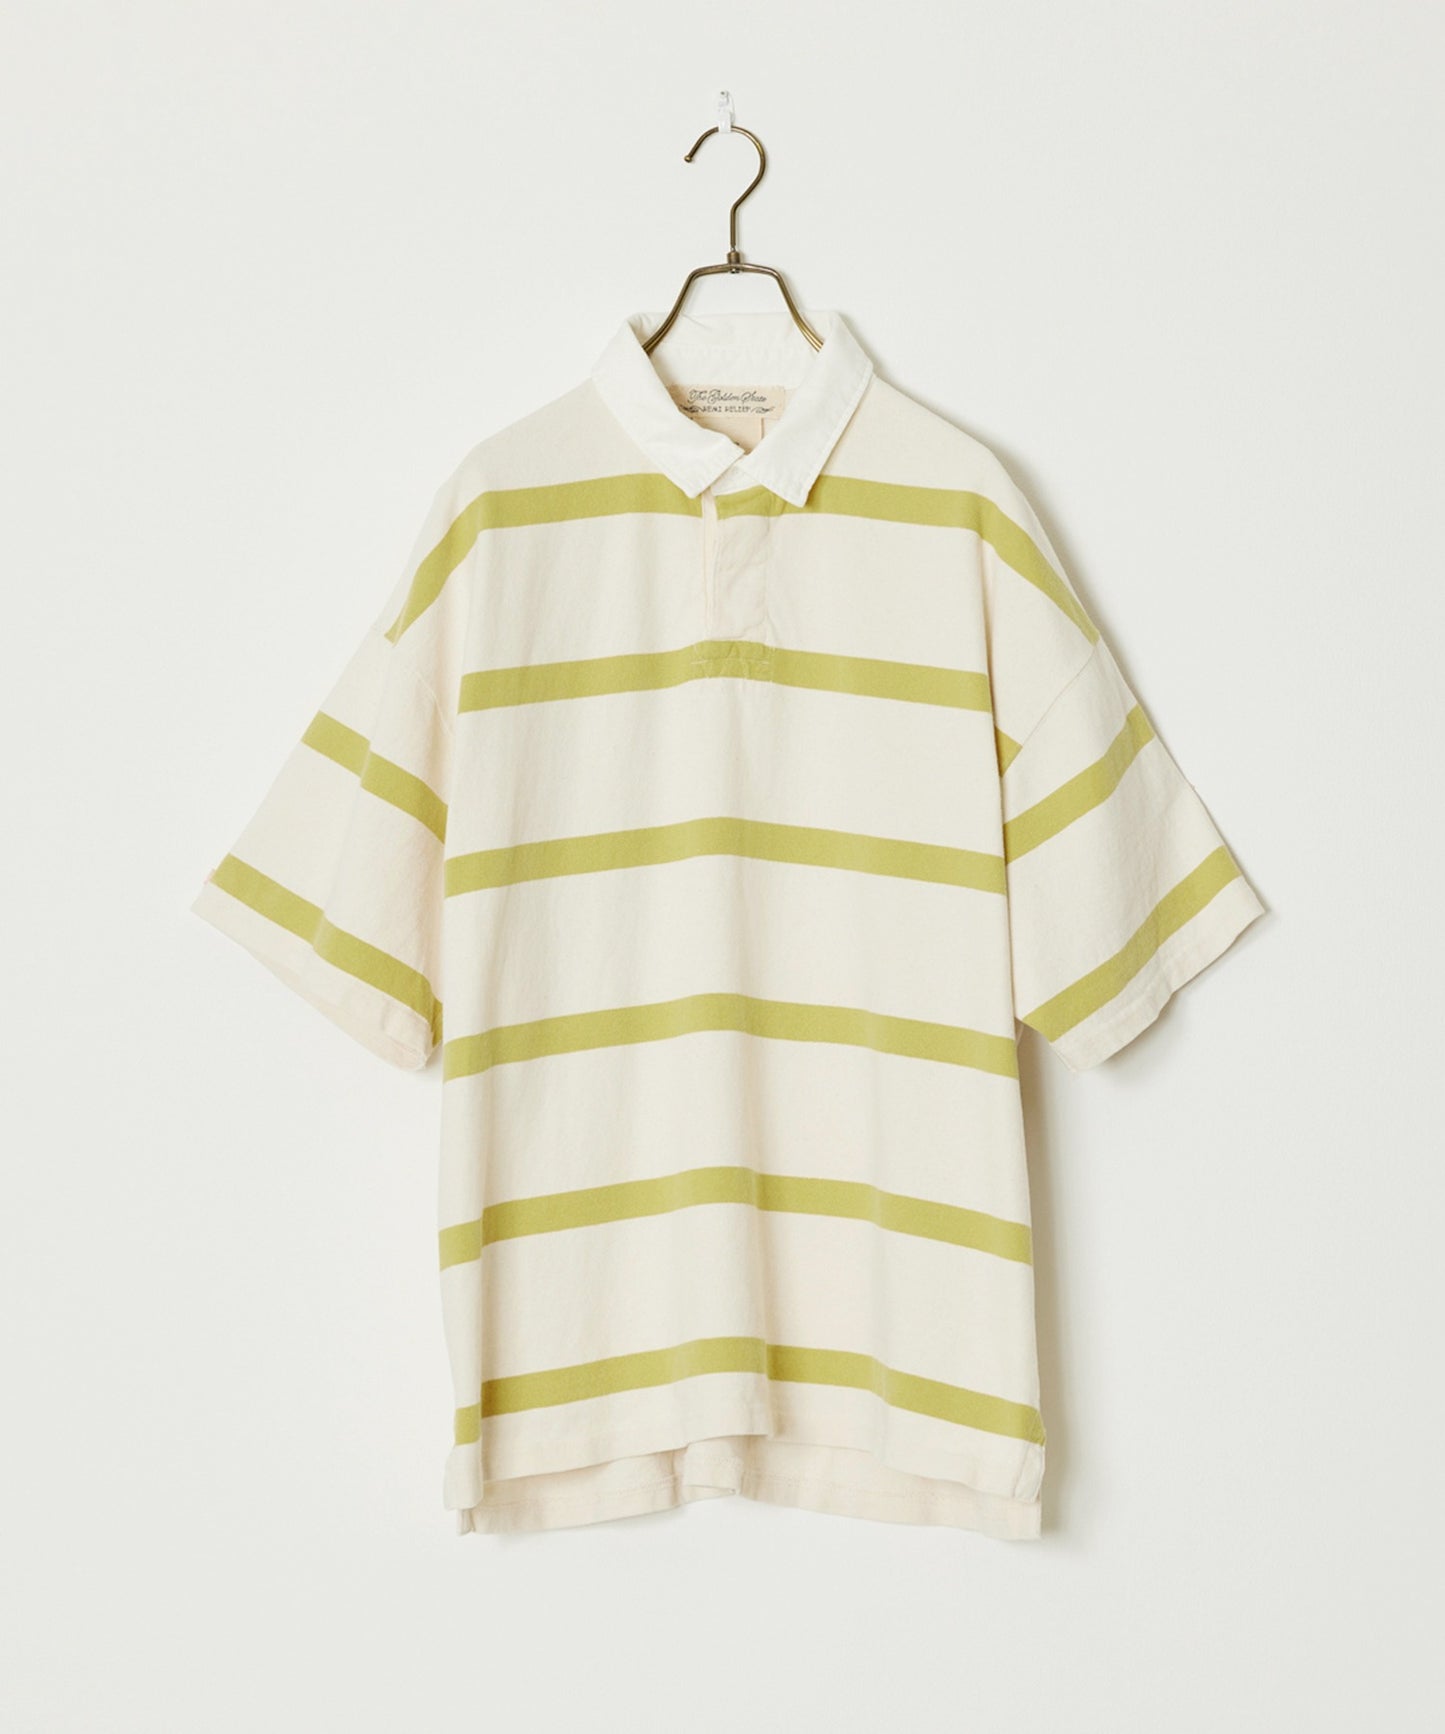 REMI RELIEF/レミレリーフ 8/-ボーダーラガーSHIRT S/S